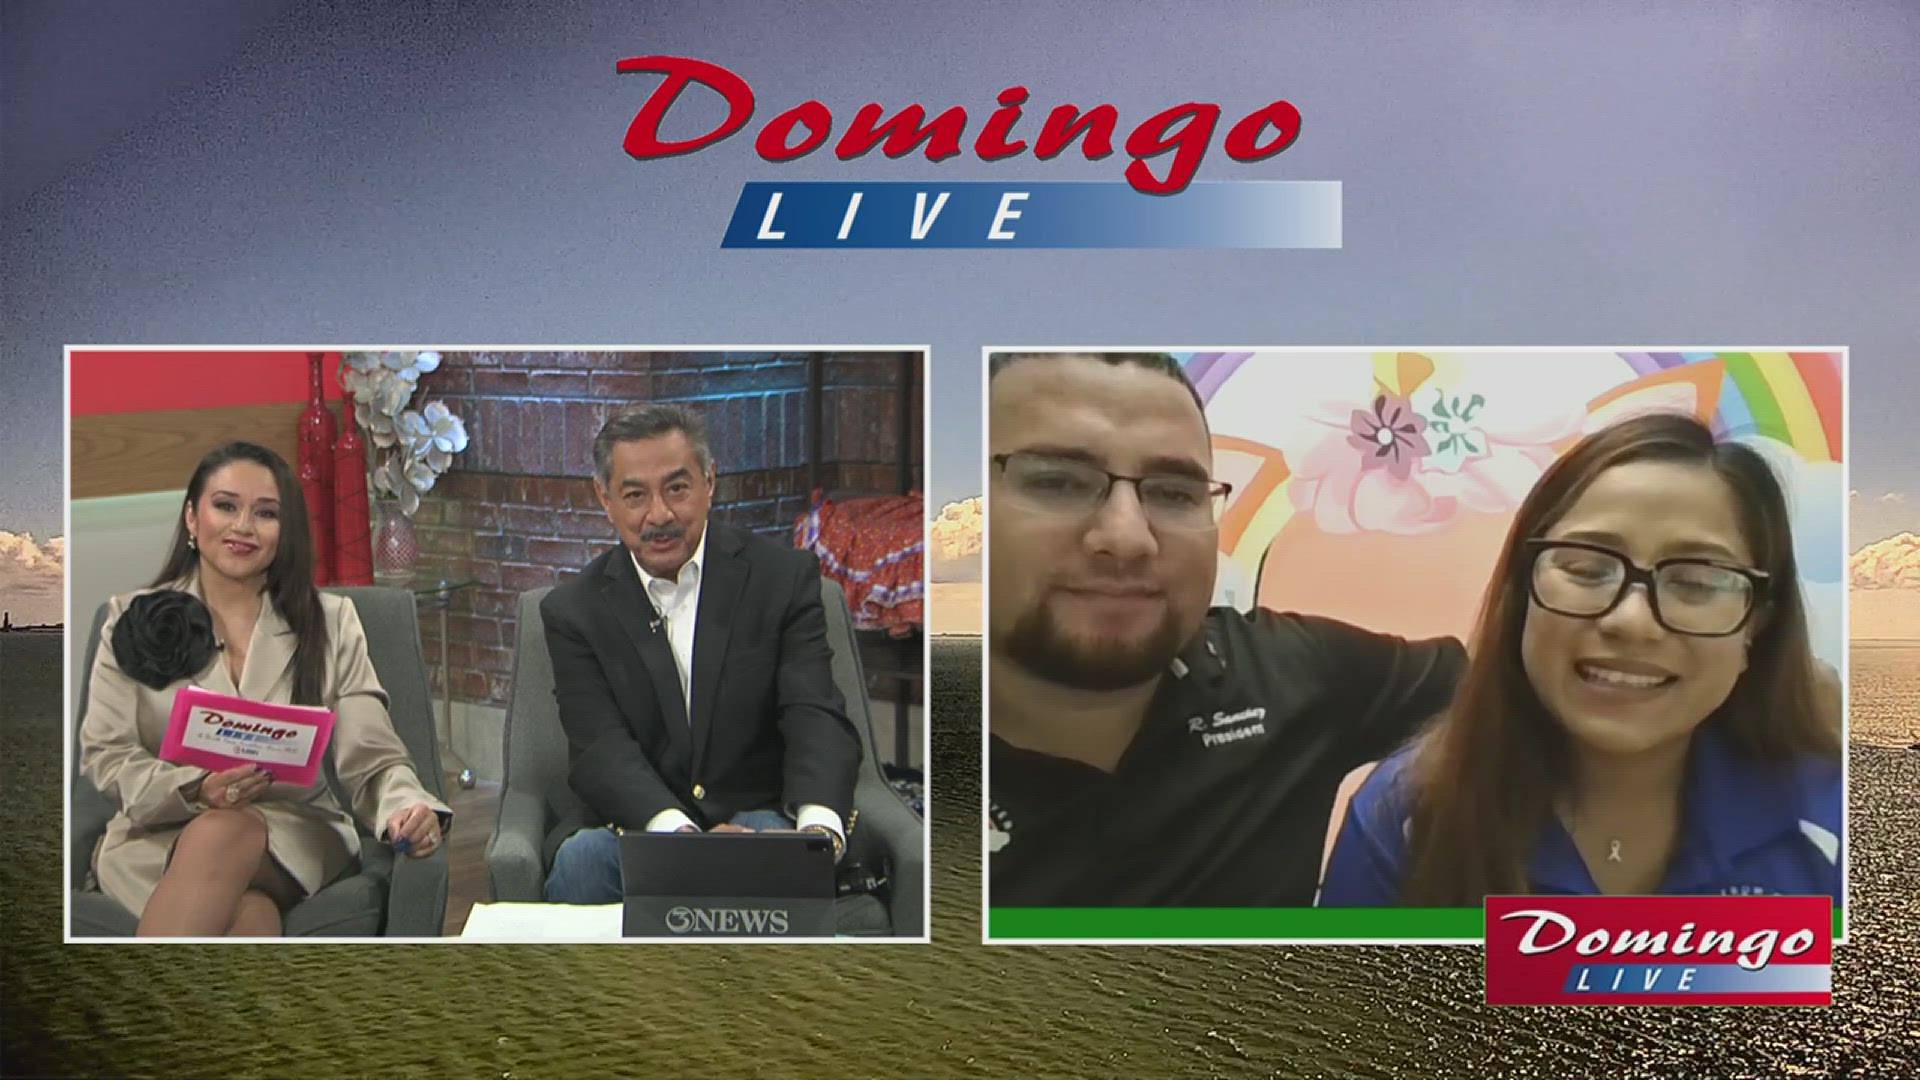 Smiles From Heaven founder Betsy Sanchez joined us on Domingo Live to talk about the upcoming Superhero Walk and how it will raise awareness of childhood cancer.